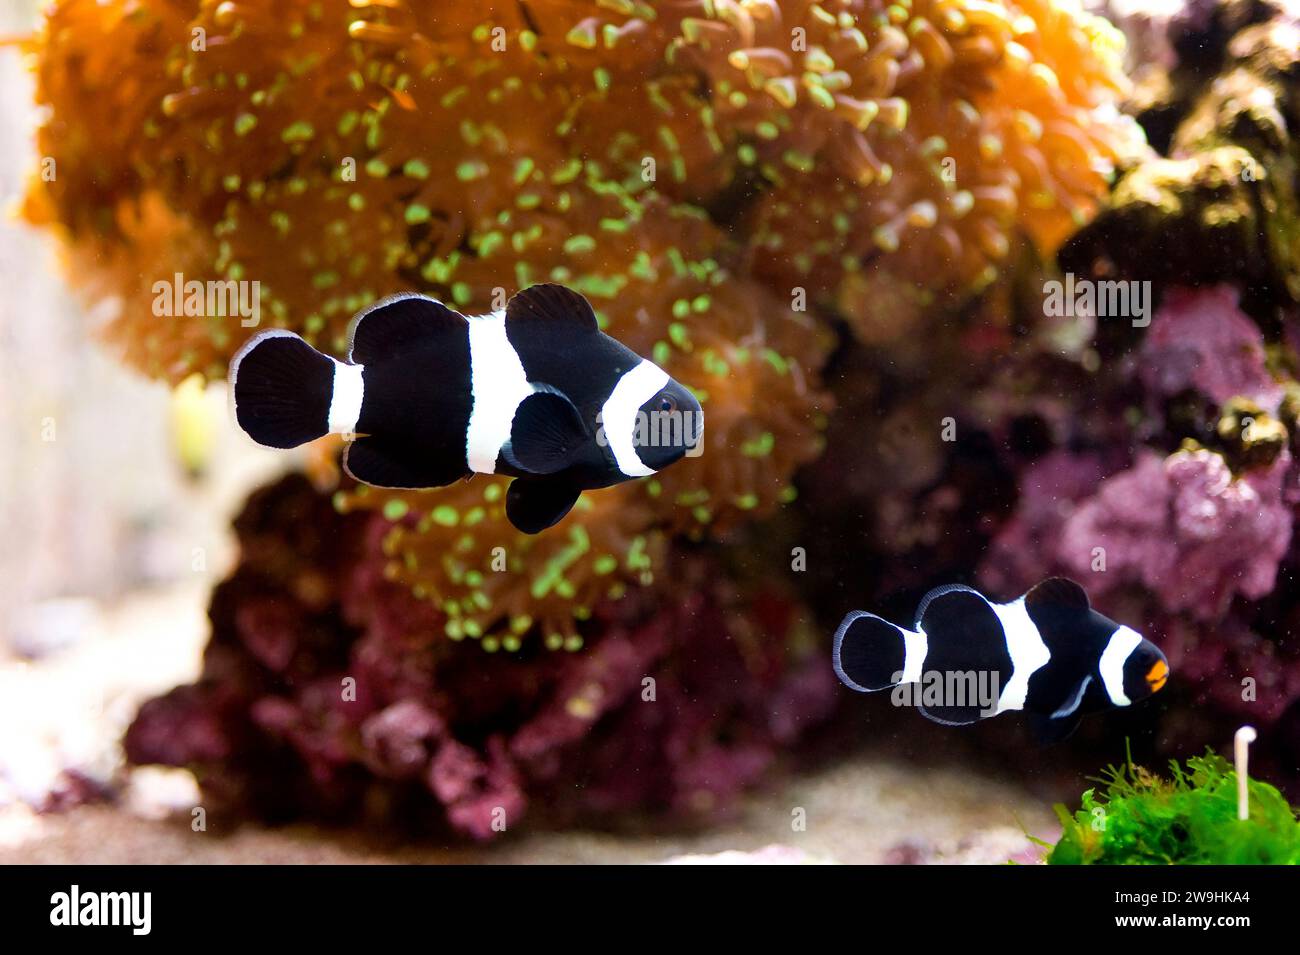 Saddleback clownfish (Amphiprion polymnus) is a marine fish native to tropical Indo-Pacific Ocean. Stock Photo